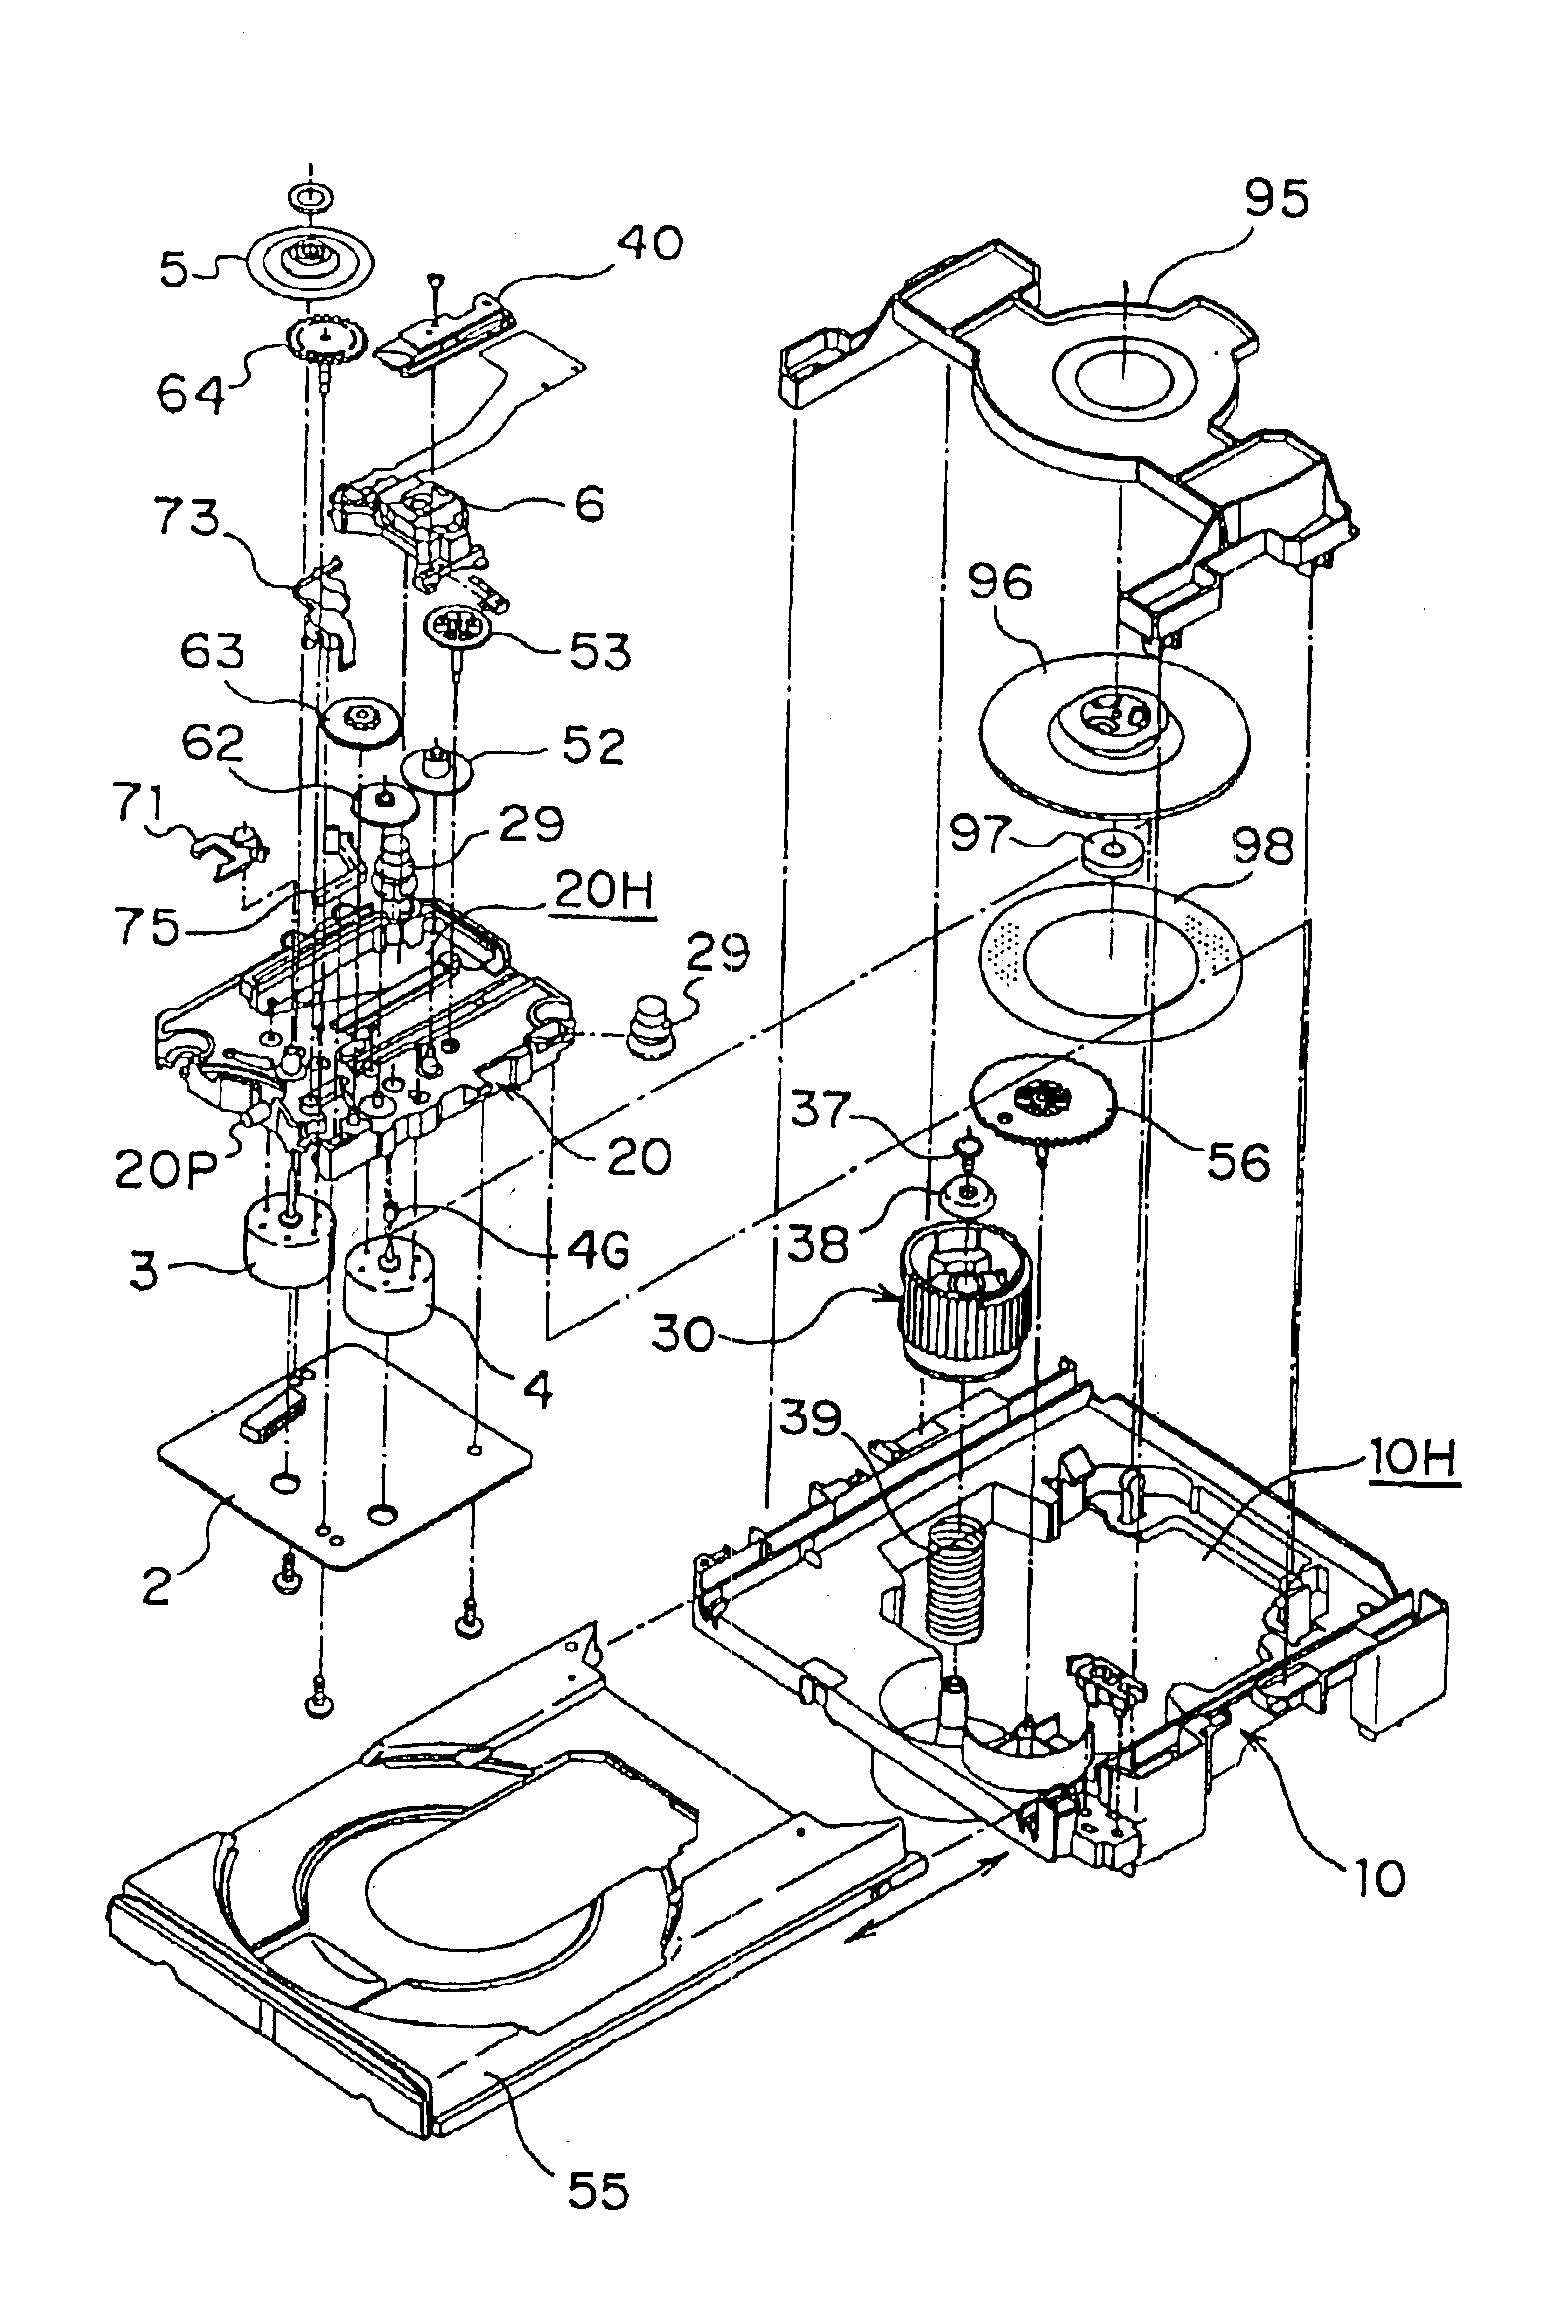 Optical disk drive including a first base portion and a movable second base portion